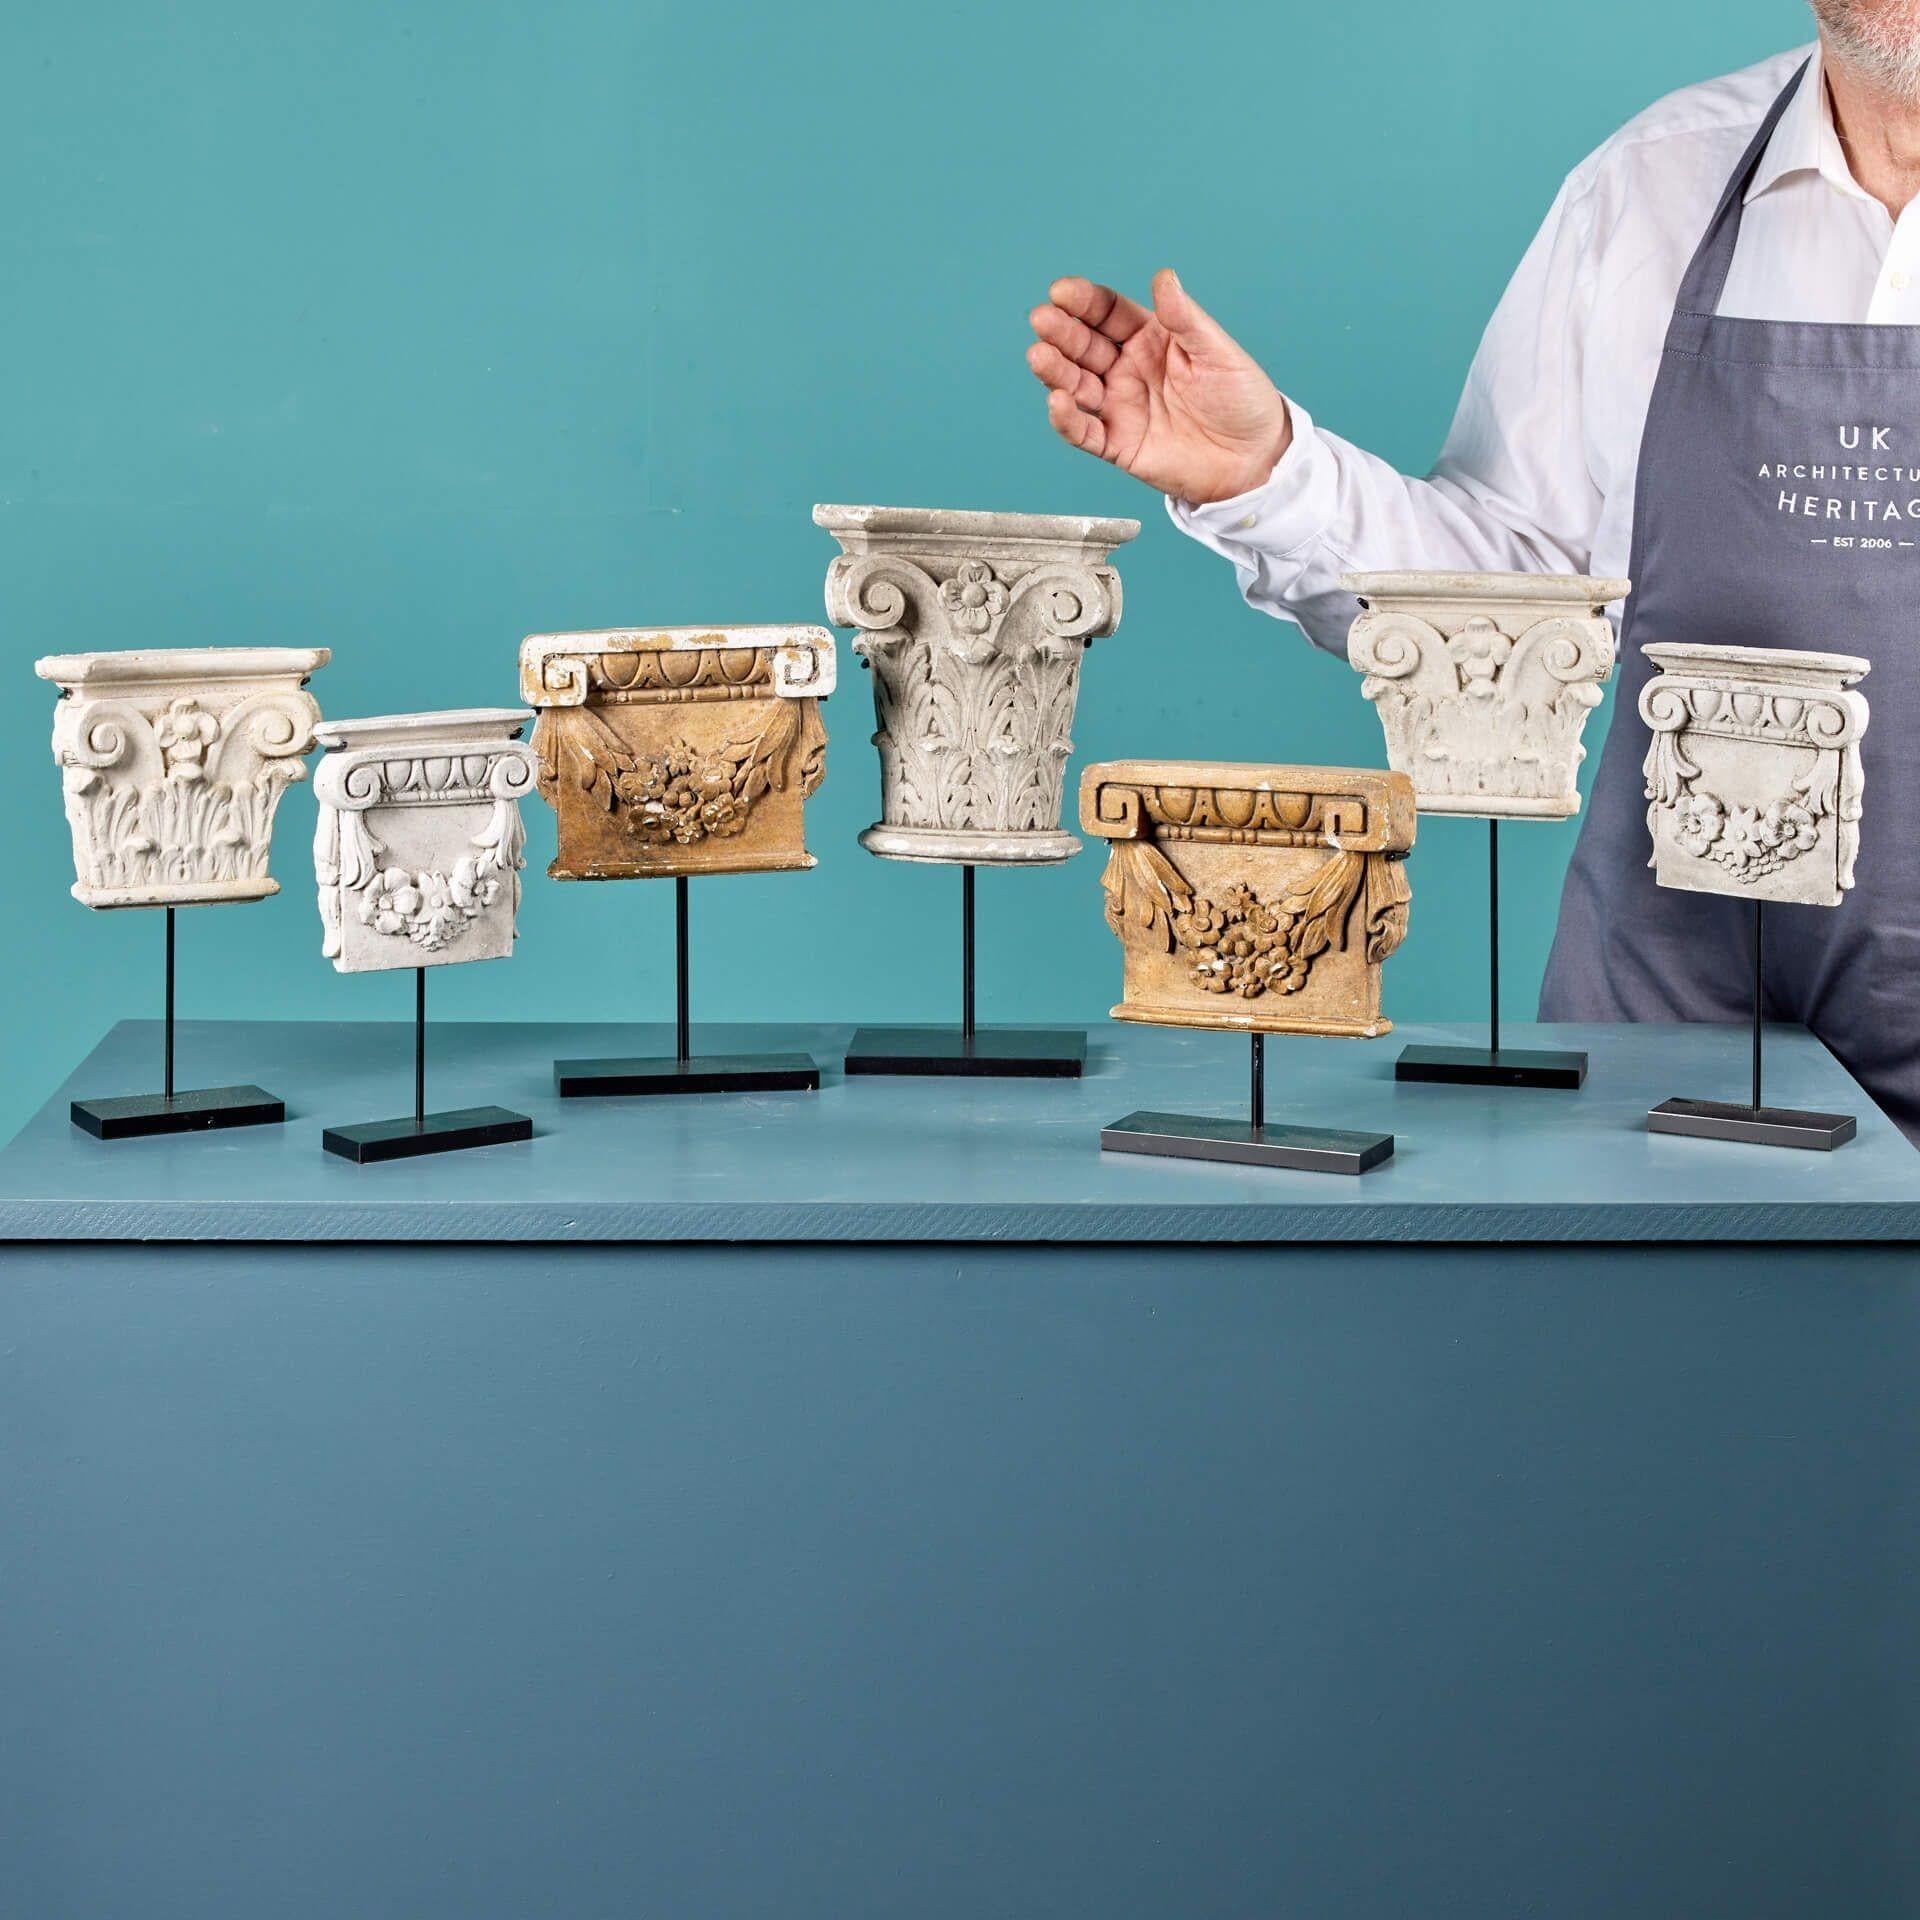 A set of 7 decorative antique plaster capitals of French origin, circa 1880. The set are displayed on bespoke steel stands at different heights to create your own graduated display of architectural mouldings. Each has an intriguing timeworn look